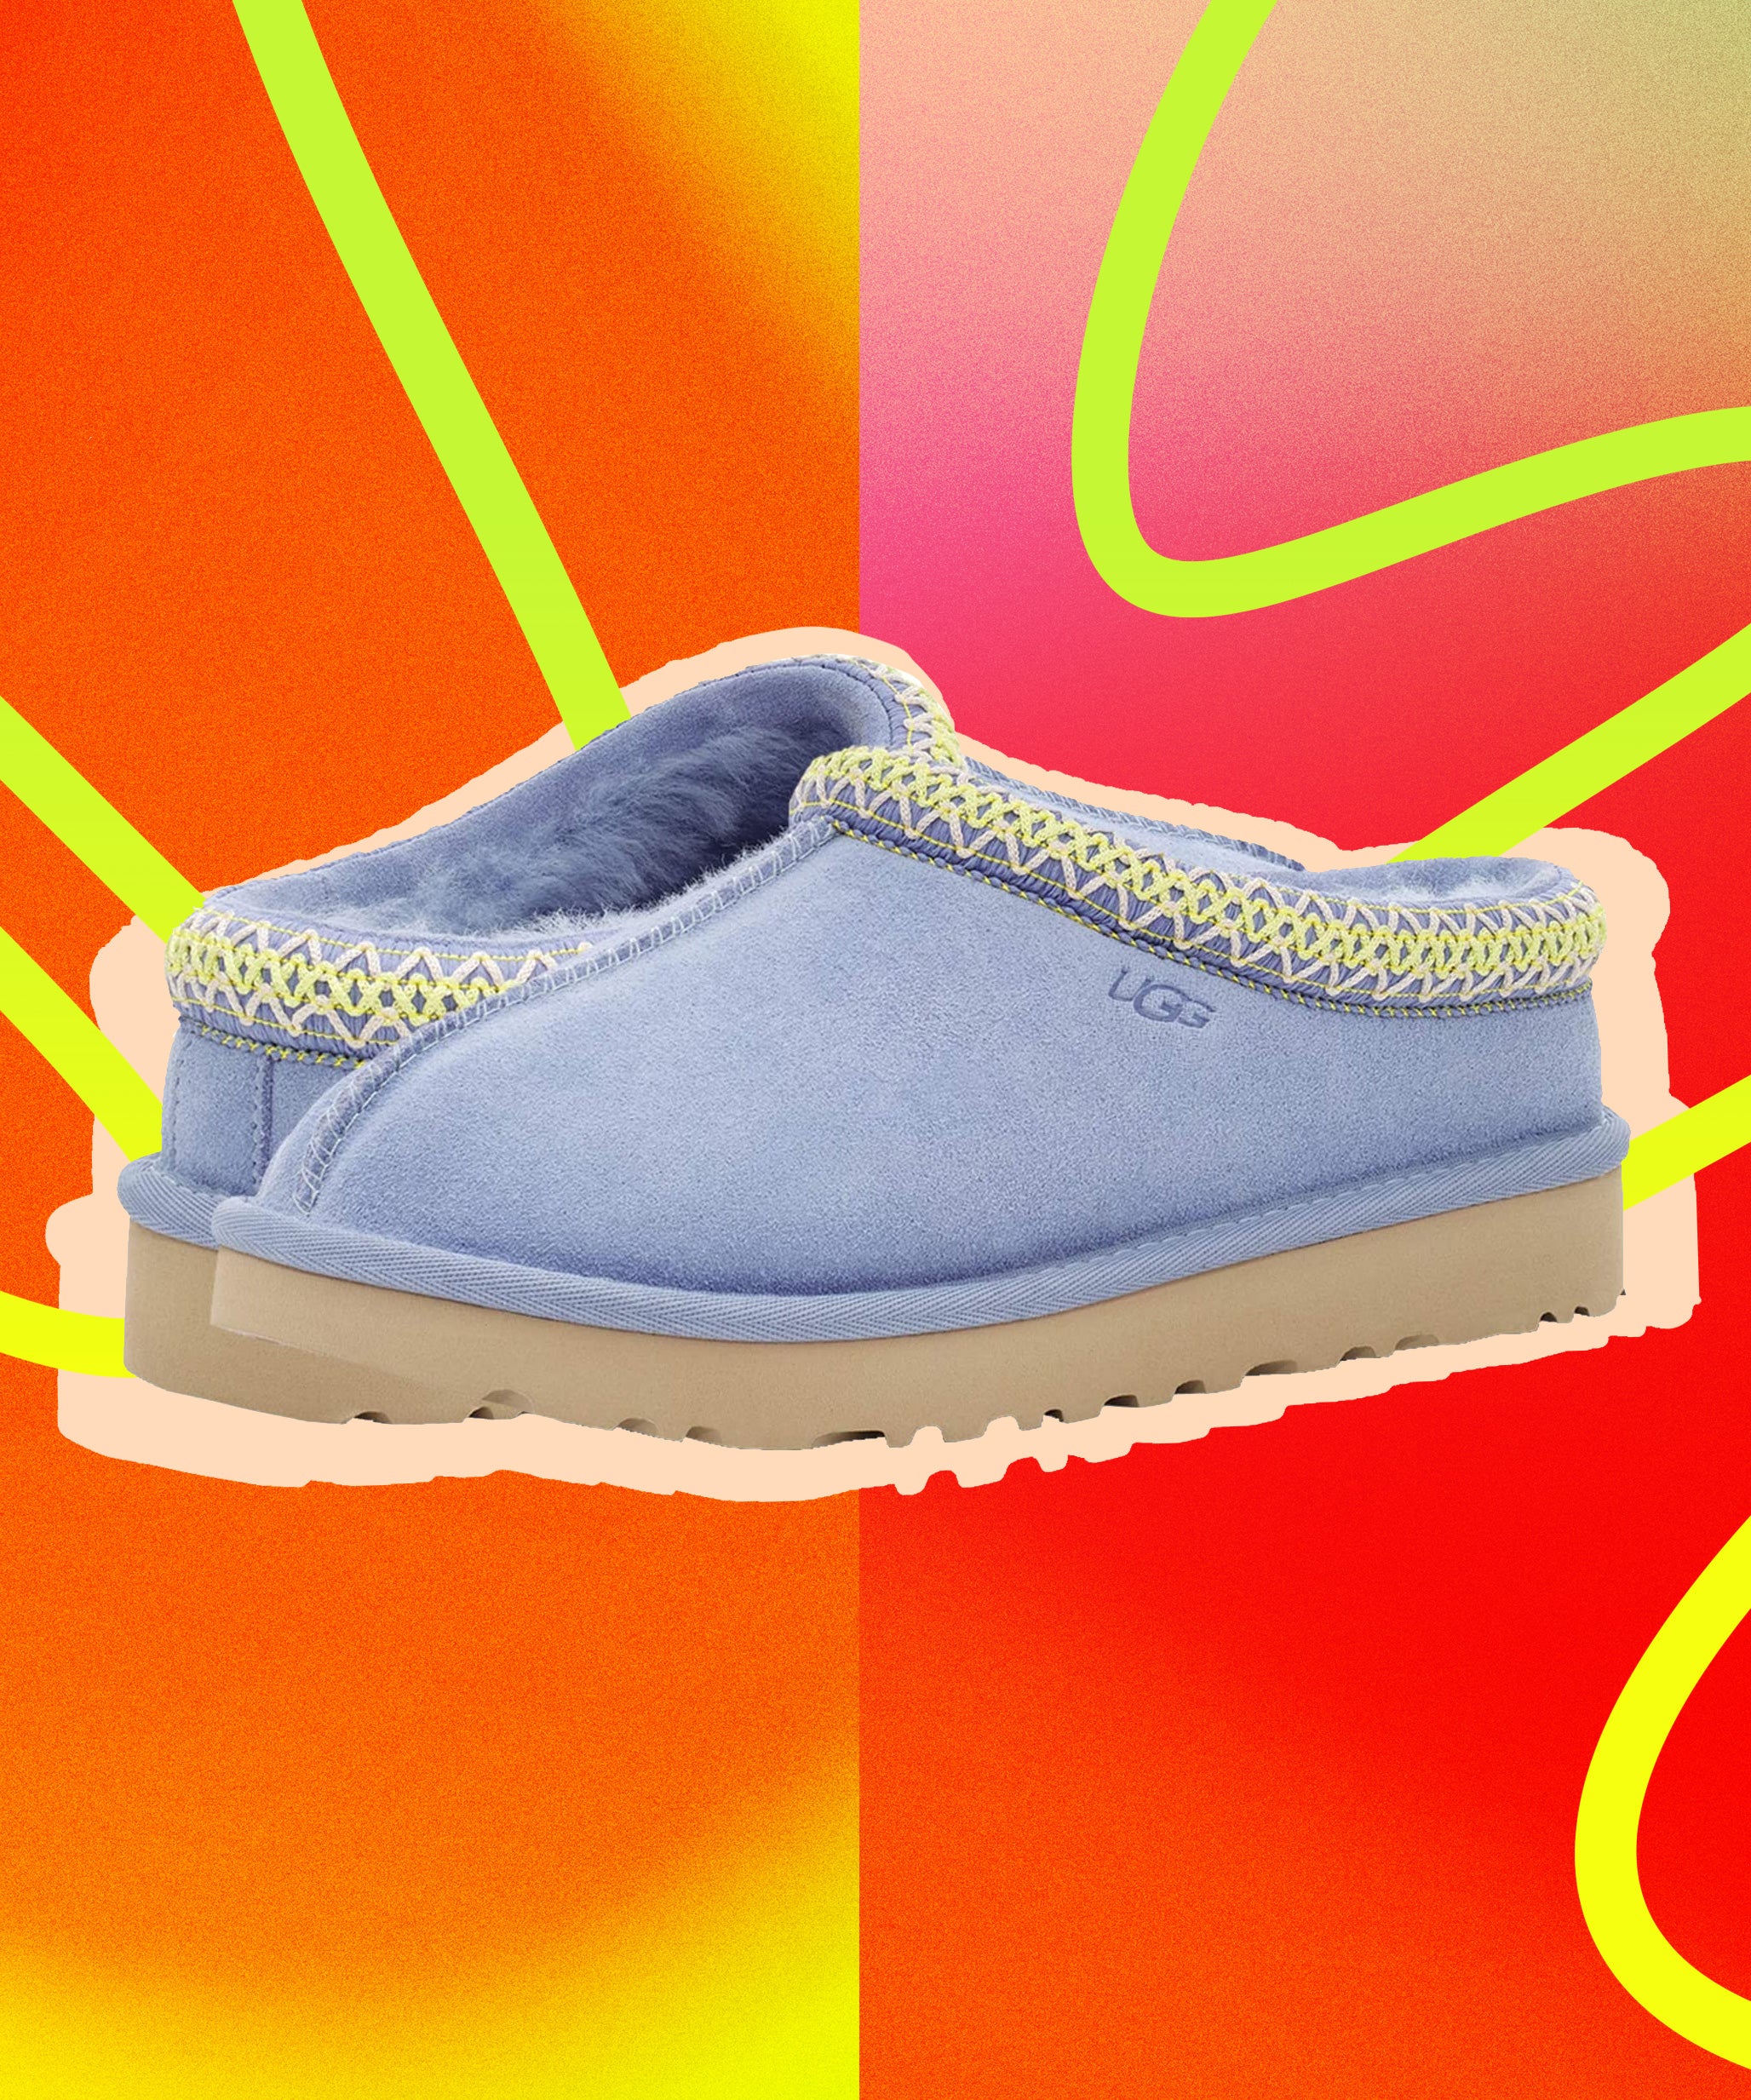 Buy > comfy shoes to wear around the house > in stock